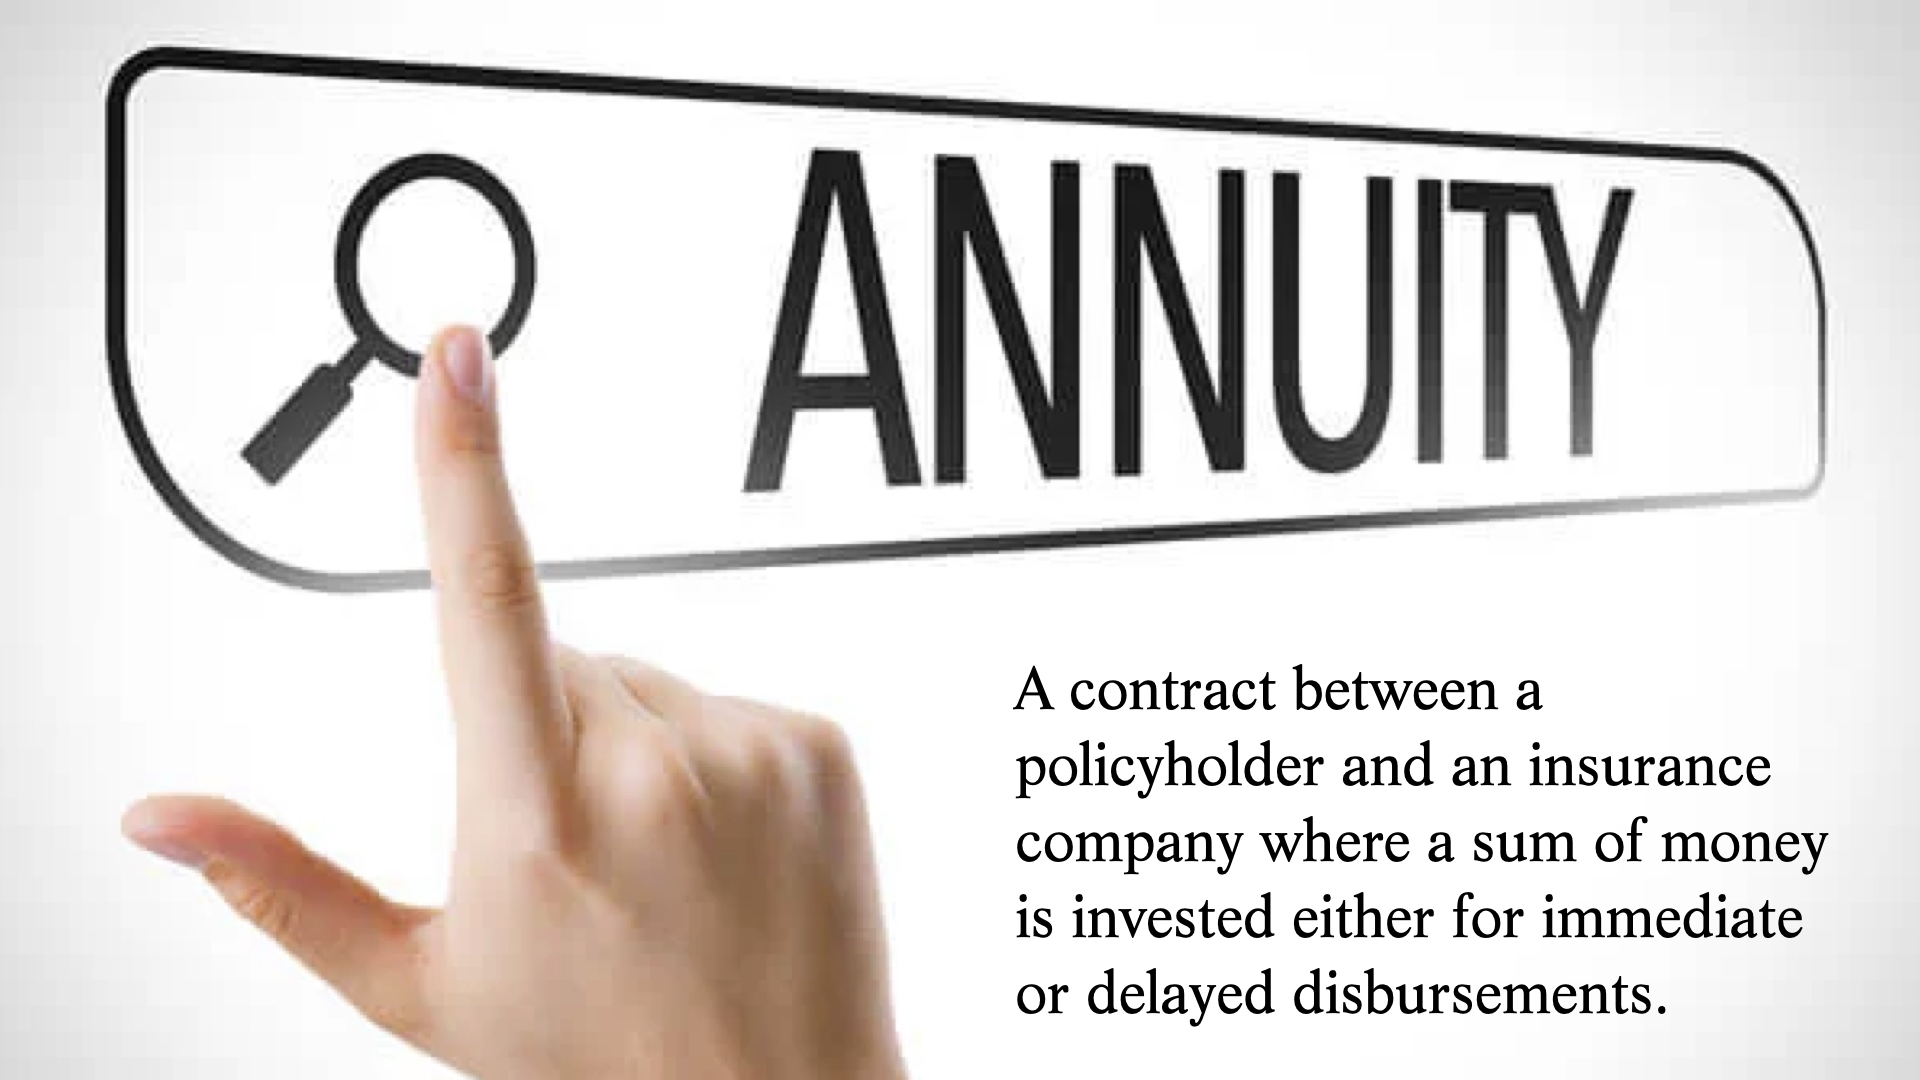 An annuity is a contract between a policy holder and an insurance company. The policy holder invests a sum of money in return for future earnings and/or withdrawals.